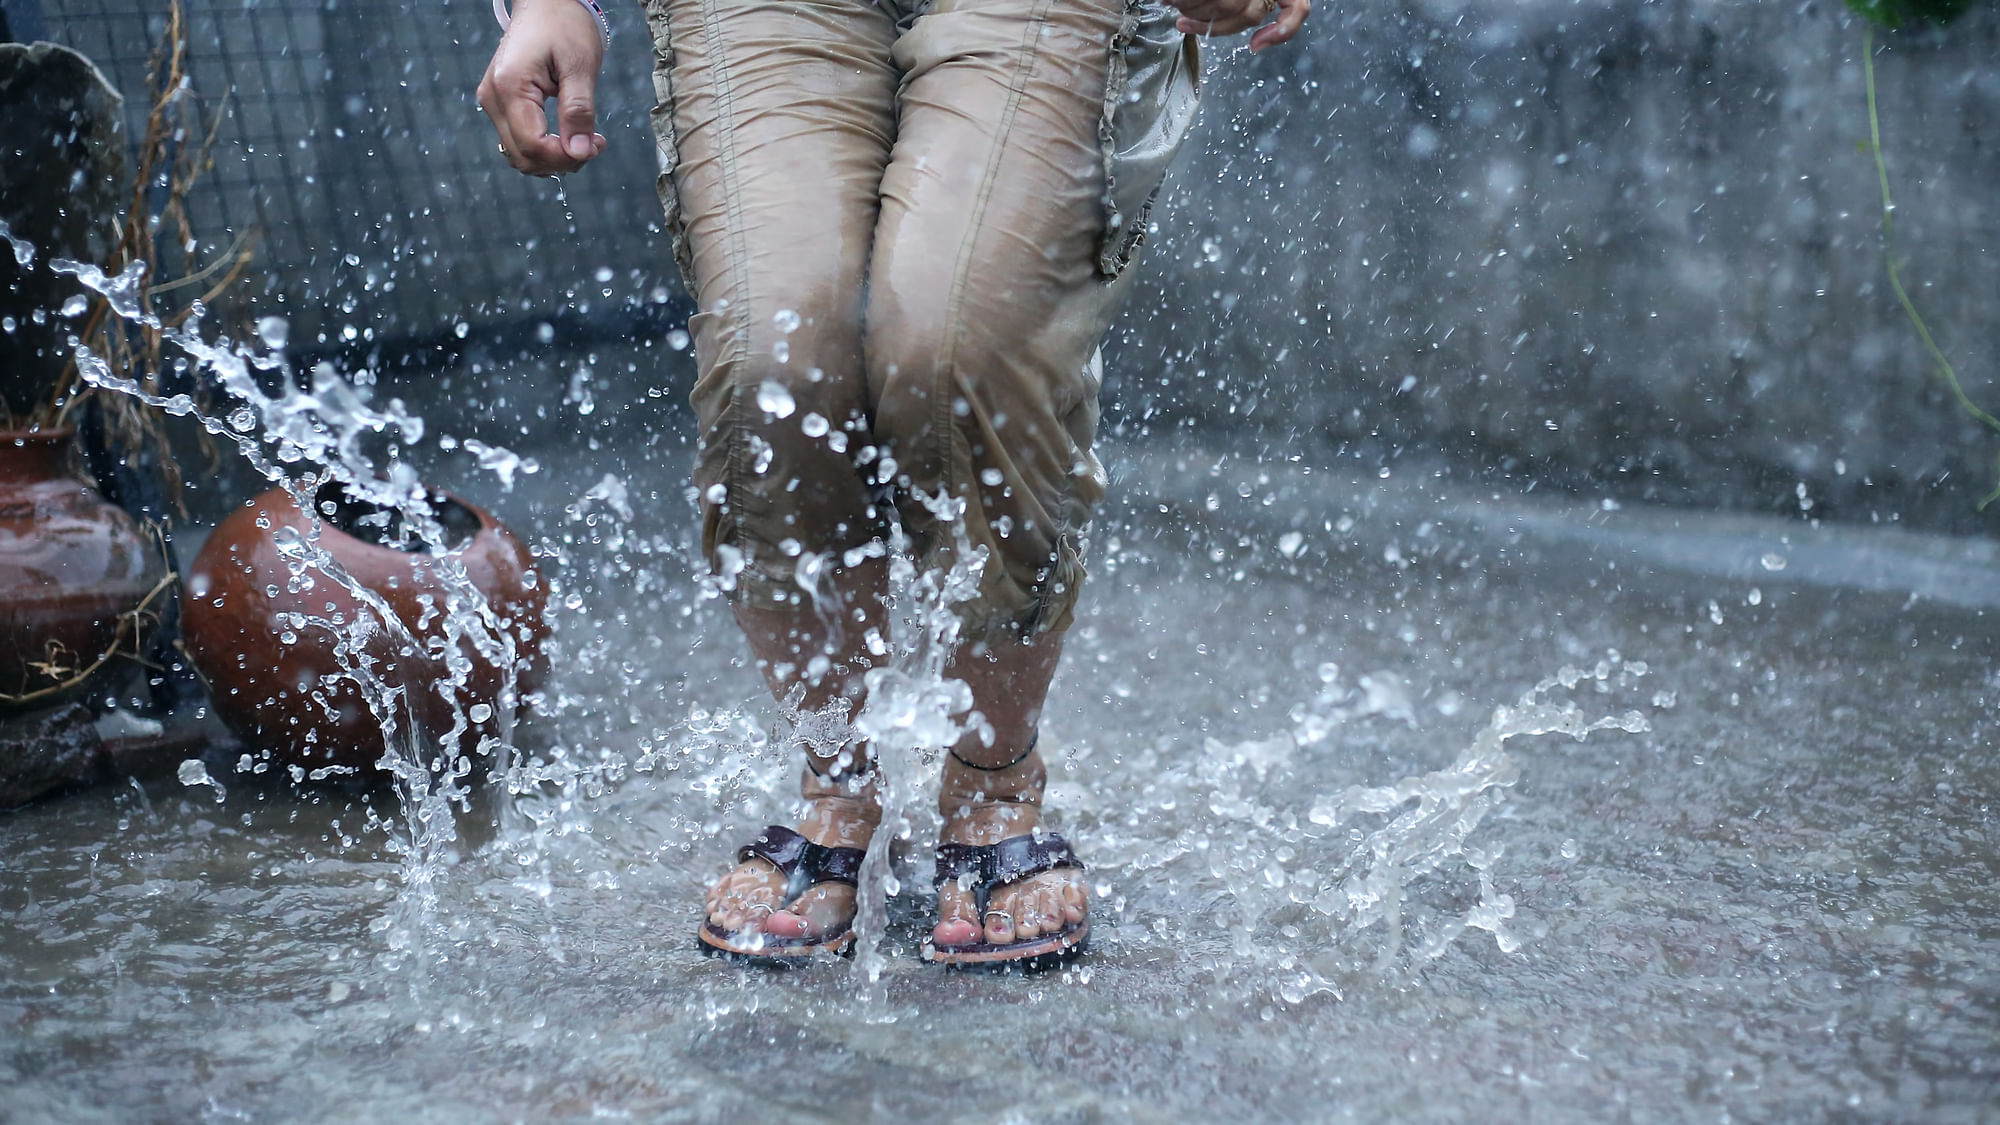 Life hacks to make our lives easier during monsoon.